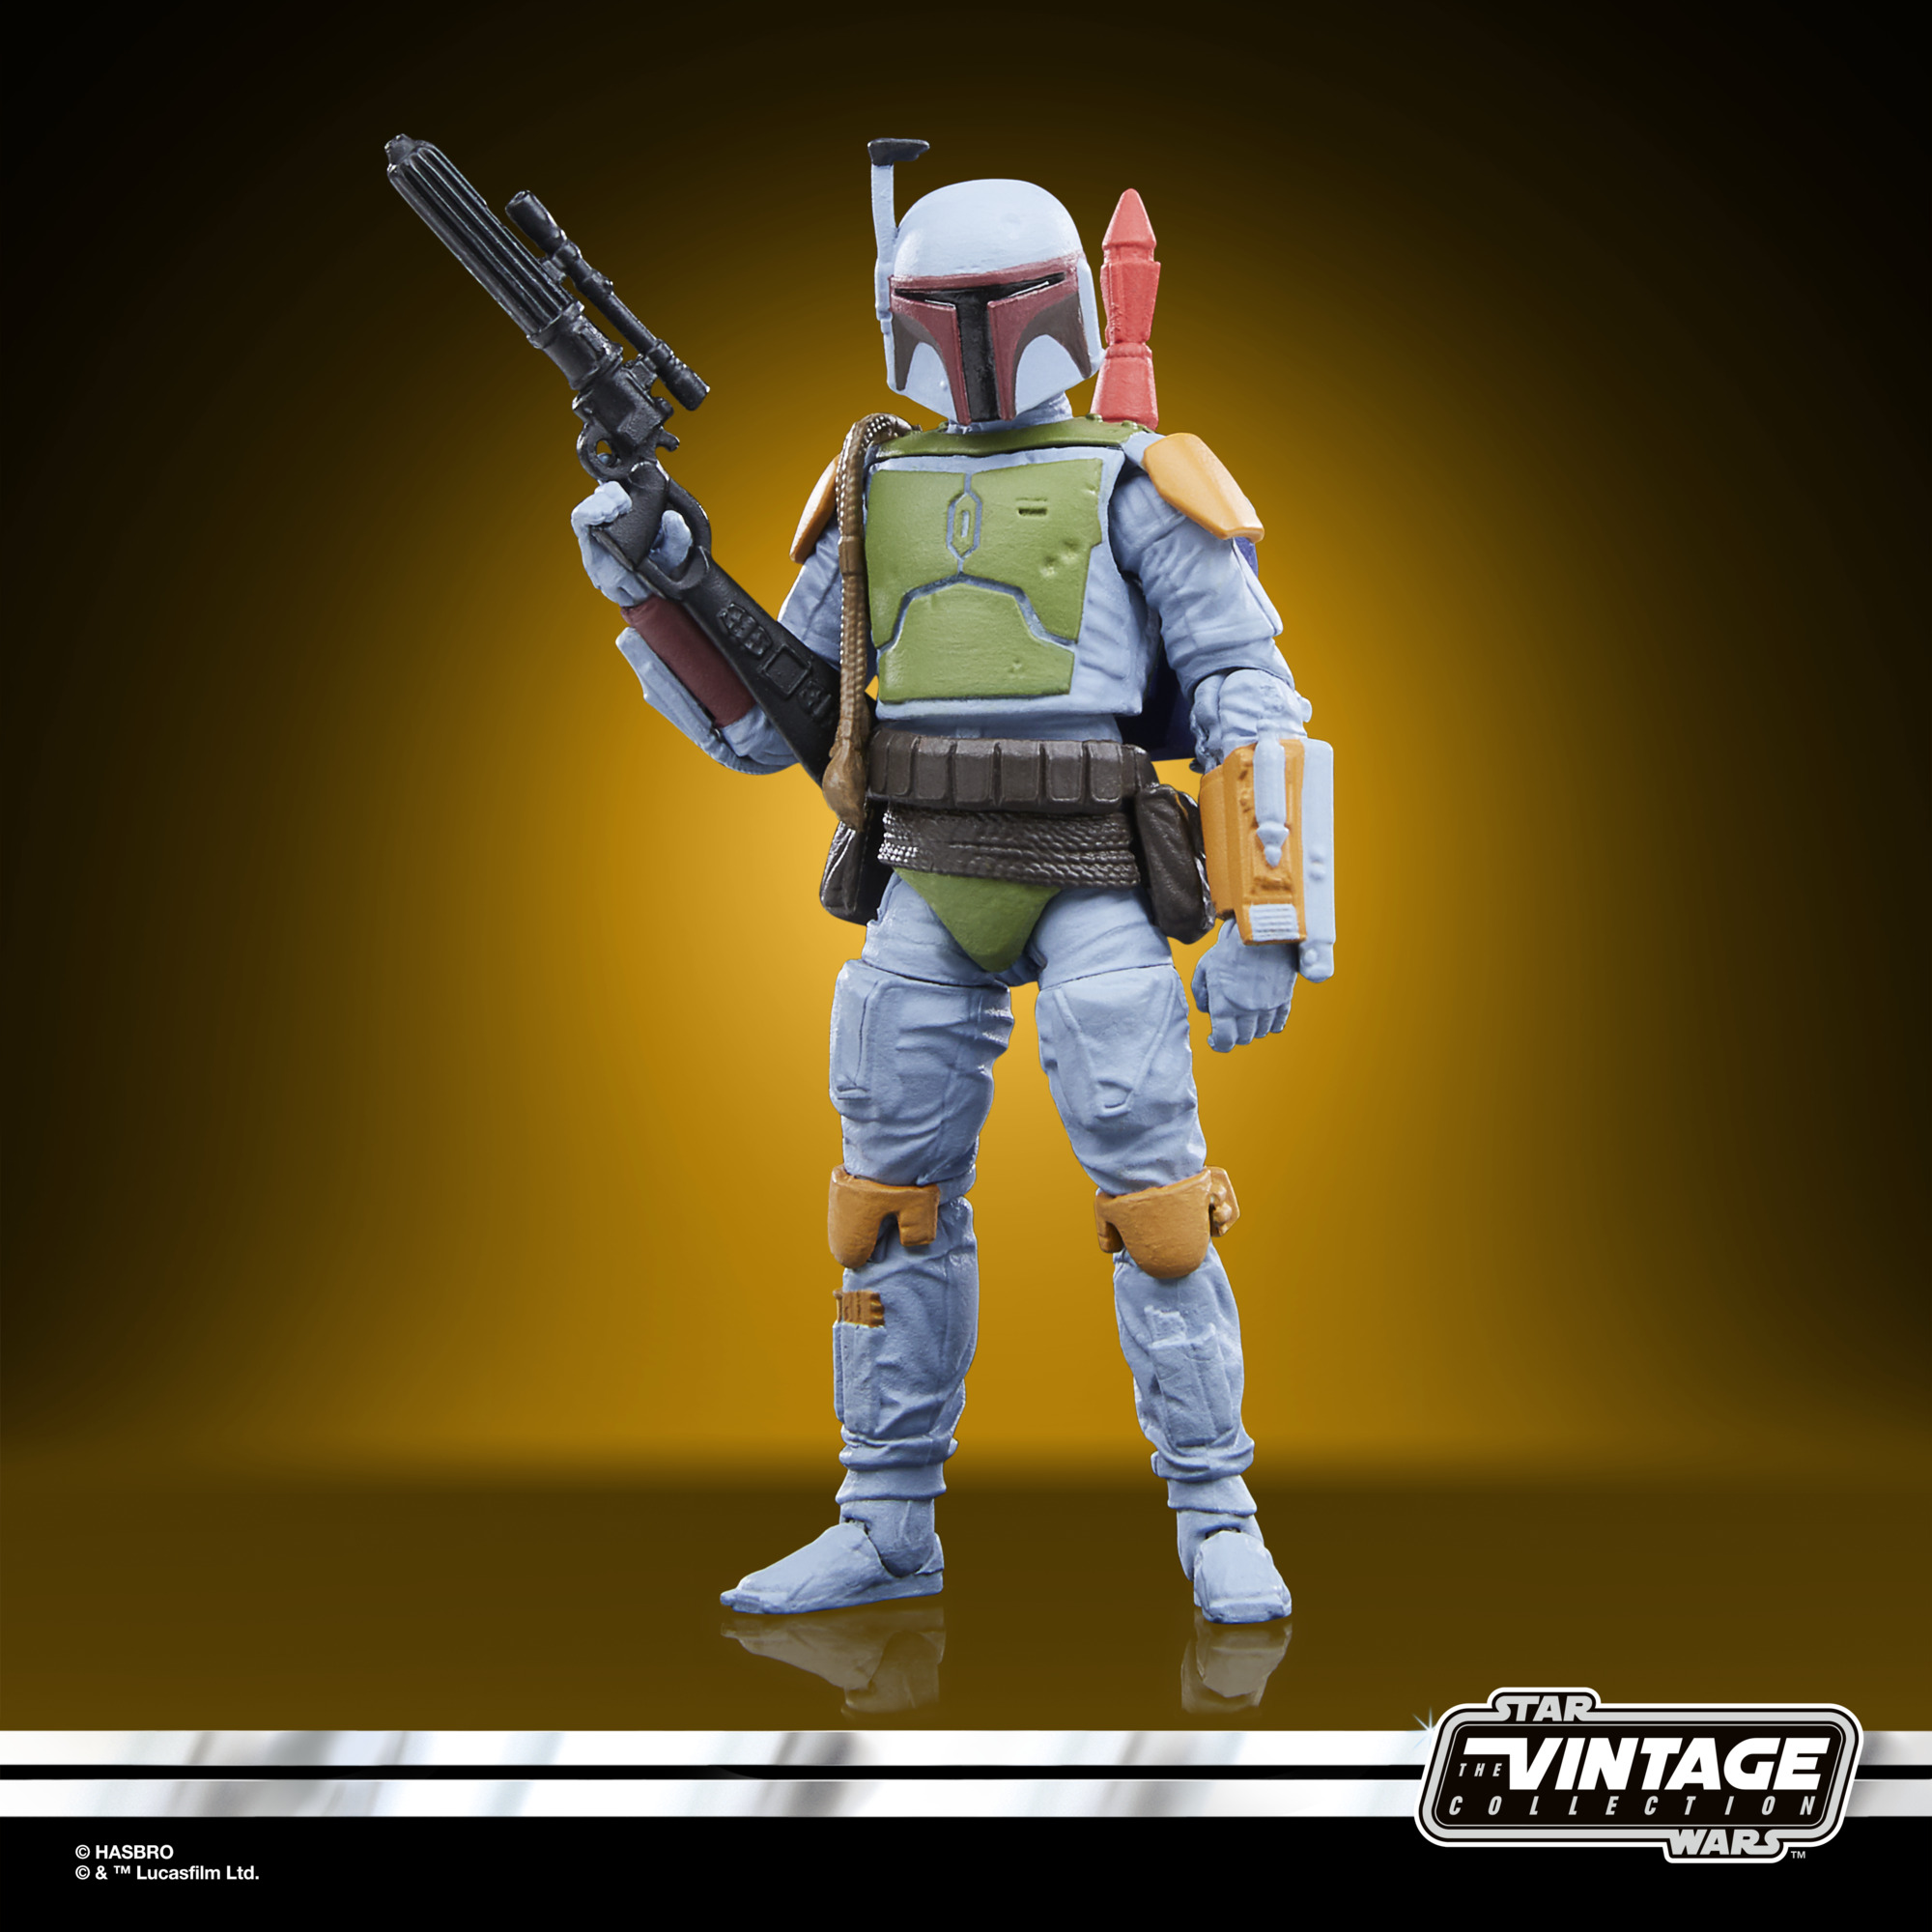 Star Wars The Vintage Collection Boba Fett Action Figures (3.75”) Exclusive F80695L2 5010996165725